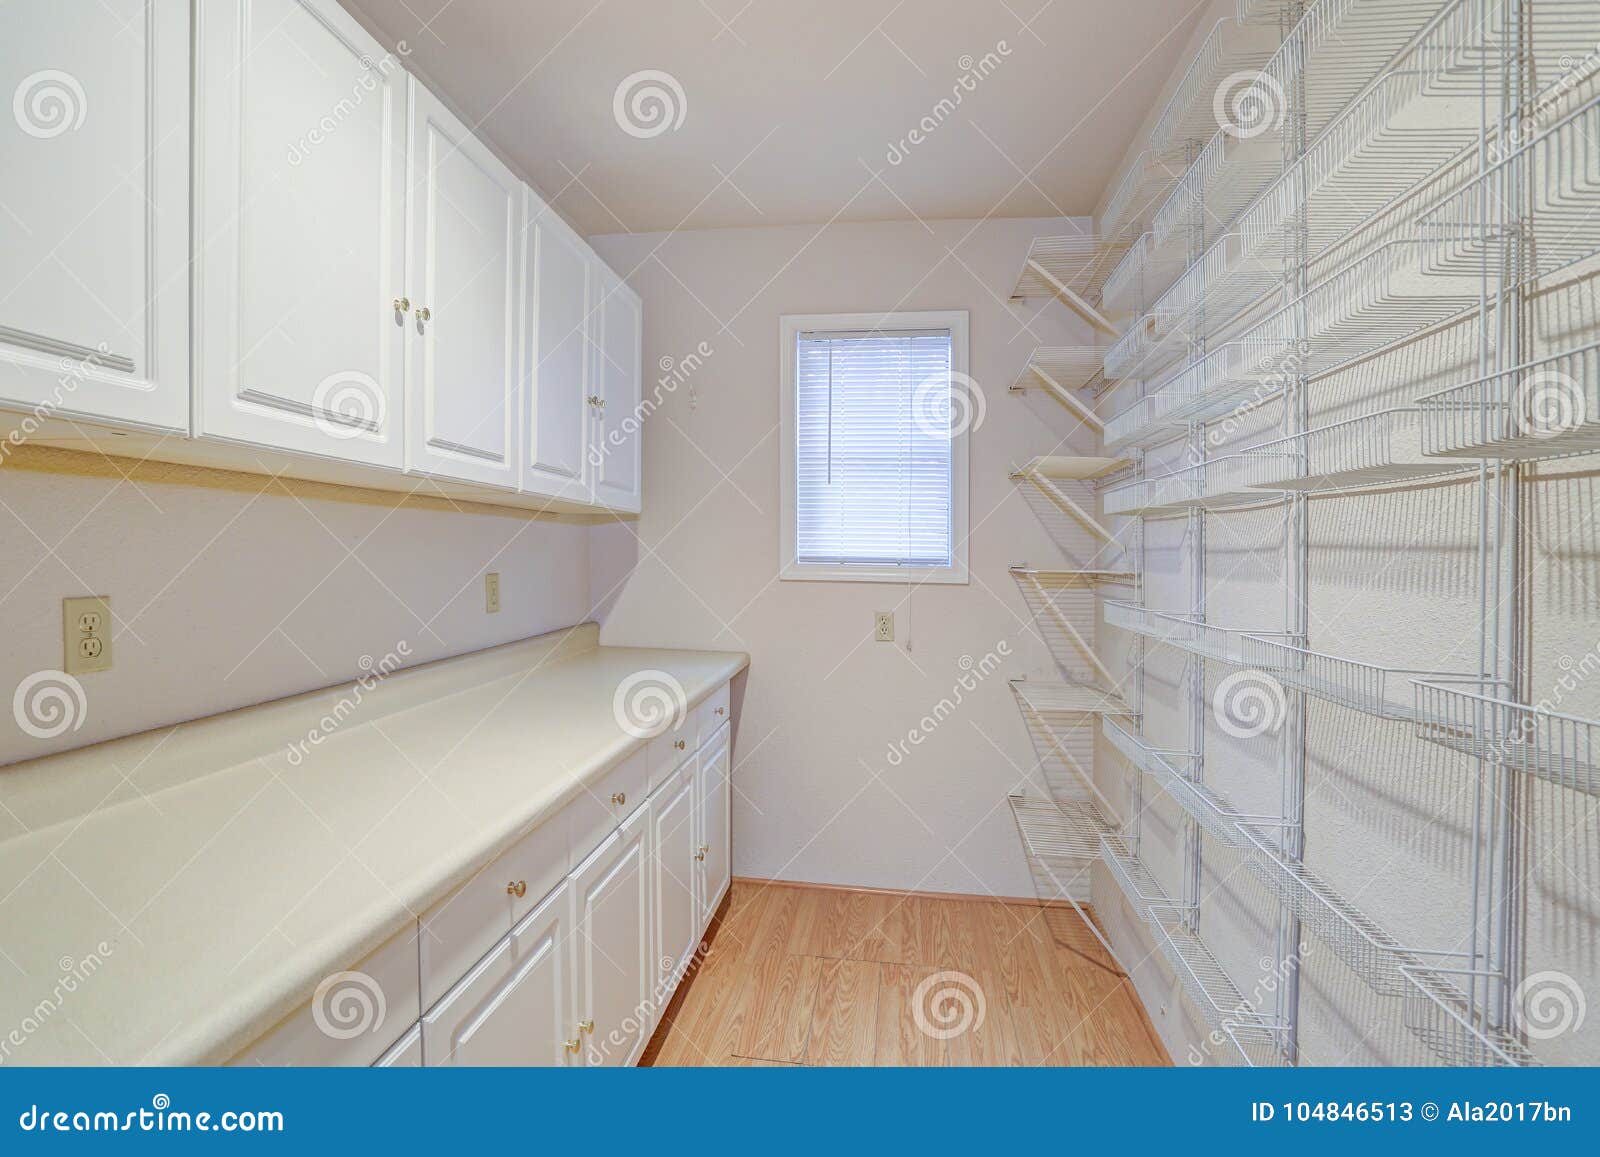 White Pantry Fitted With Shelves And Cabinets Stock Image Image